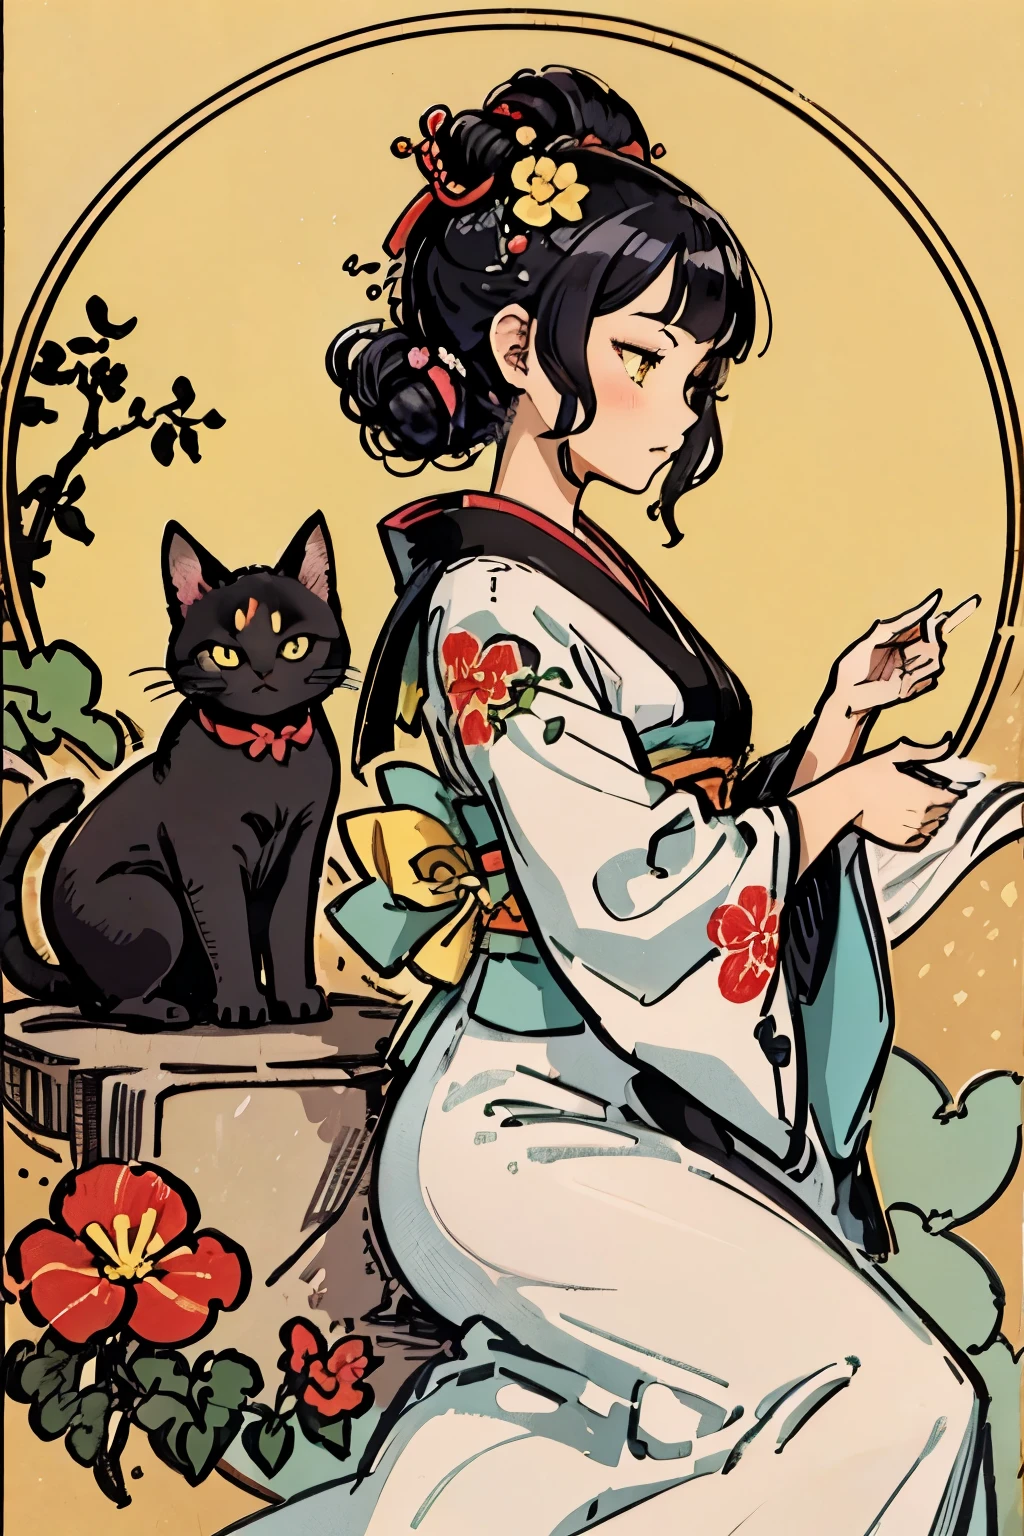 propose a very attractive design, 1 girl and 1 cat, masterpiece, katsushika hokusai-kaze, natural color design, morning glory flowers, bold and beautiful floral design, summer image, japanic style, detailed diagram of the pattern, with the highest quality, masterpiece high resolution, ukiyoe style, artistic style, postcard design, balanced design, composition that fits well, emo art, ukiyo-e style, japanese aesthetic, 4k resolution, gorgeous background art, attributes of a person (profile, seen from the side, elegant smile, top grade, neuter, honor students, a dark-haired, lustrous hair, unclear, poor, slender, virtuous, well-behaved, good impression), cat attributes (black cat, pitch black cat, cute little, ultra cute, yellow eyes, lithe)